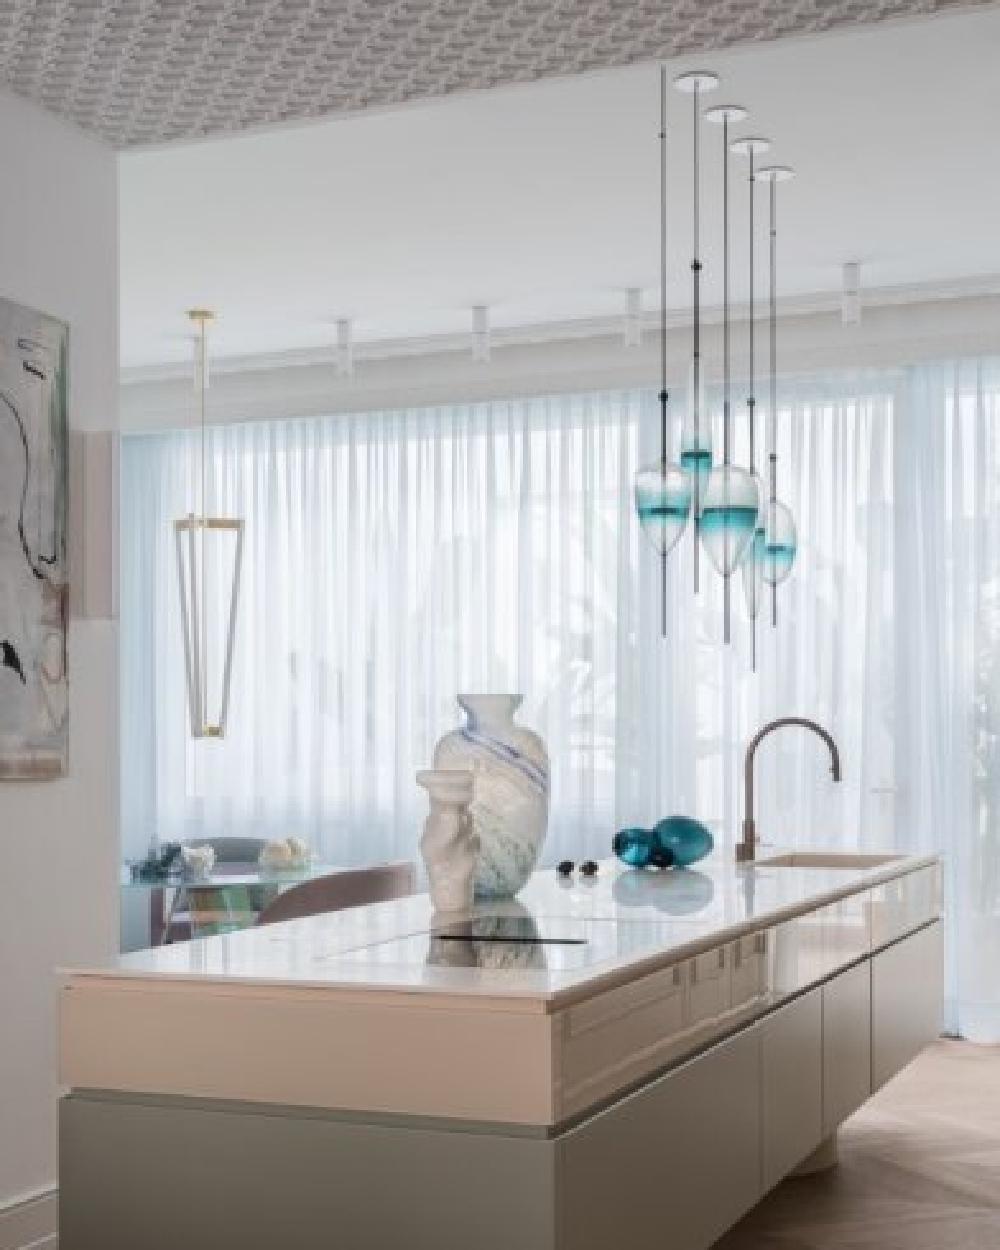 FLOW[T] S4 Pendant lamp in White by Nao Tamura for Wonderglass For Sale 1